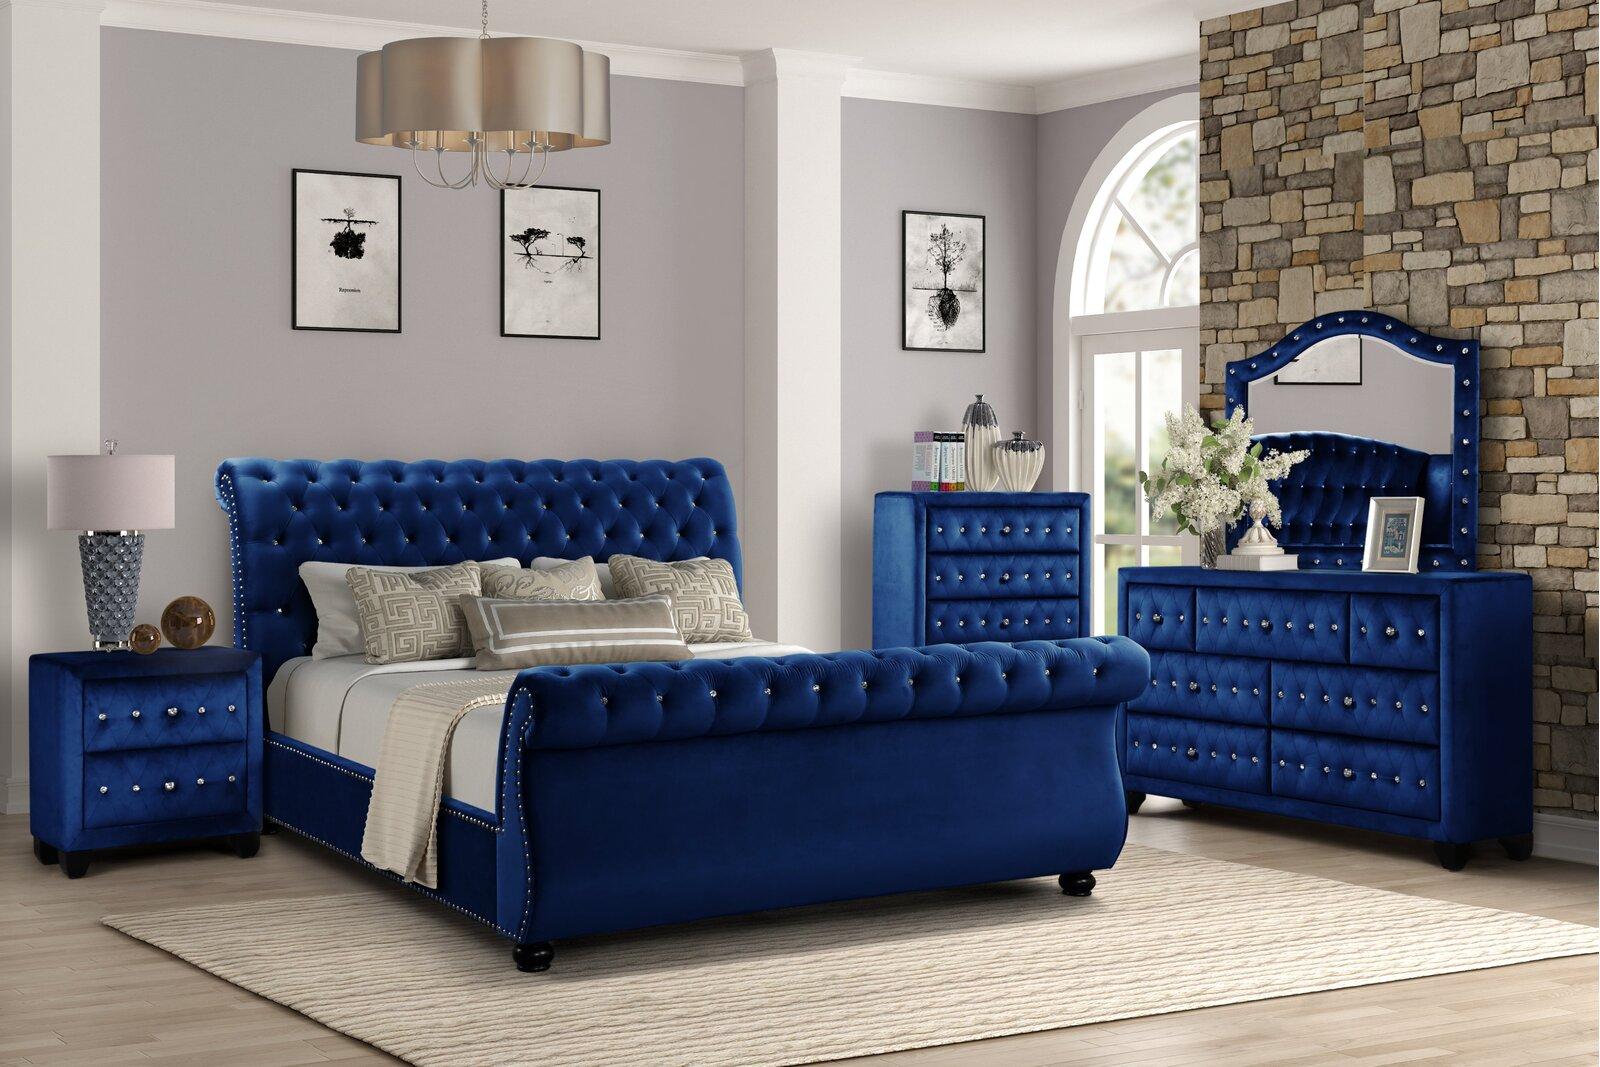 

    
Blue Velvet Crystal Tufted Queen Bed Set 4Pcs KENDALL Galaxy Home Contemporary
